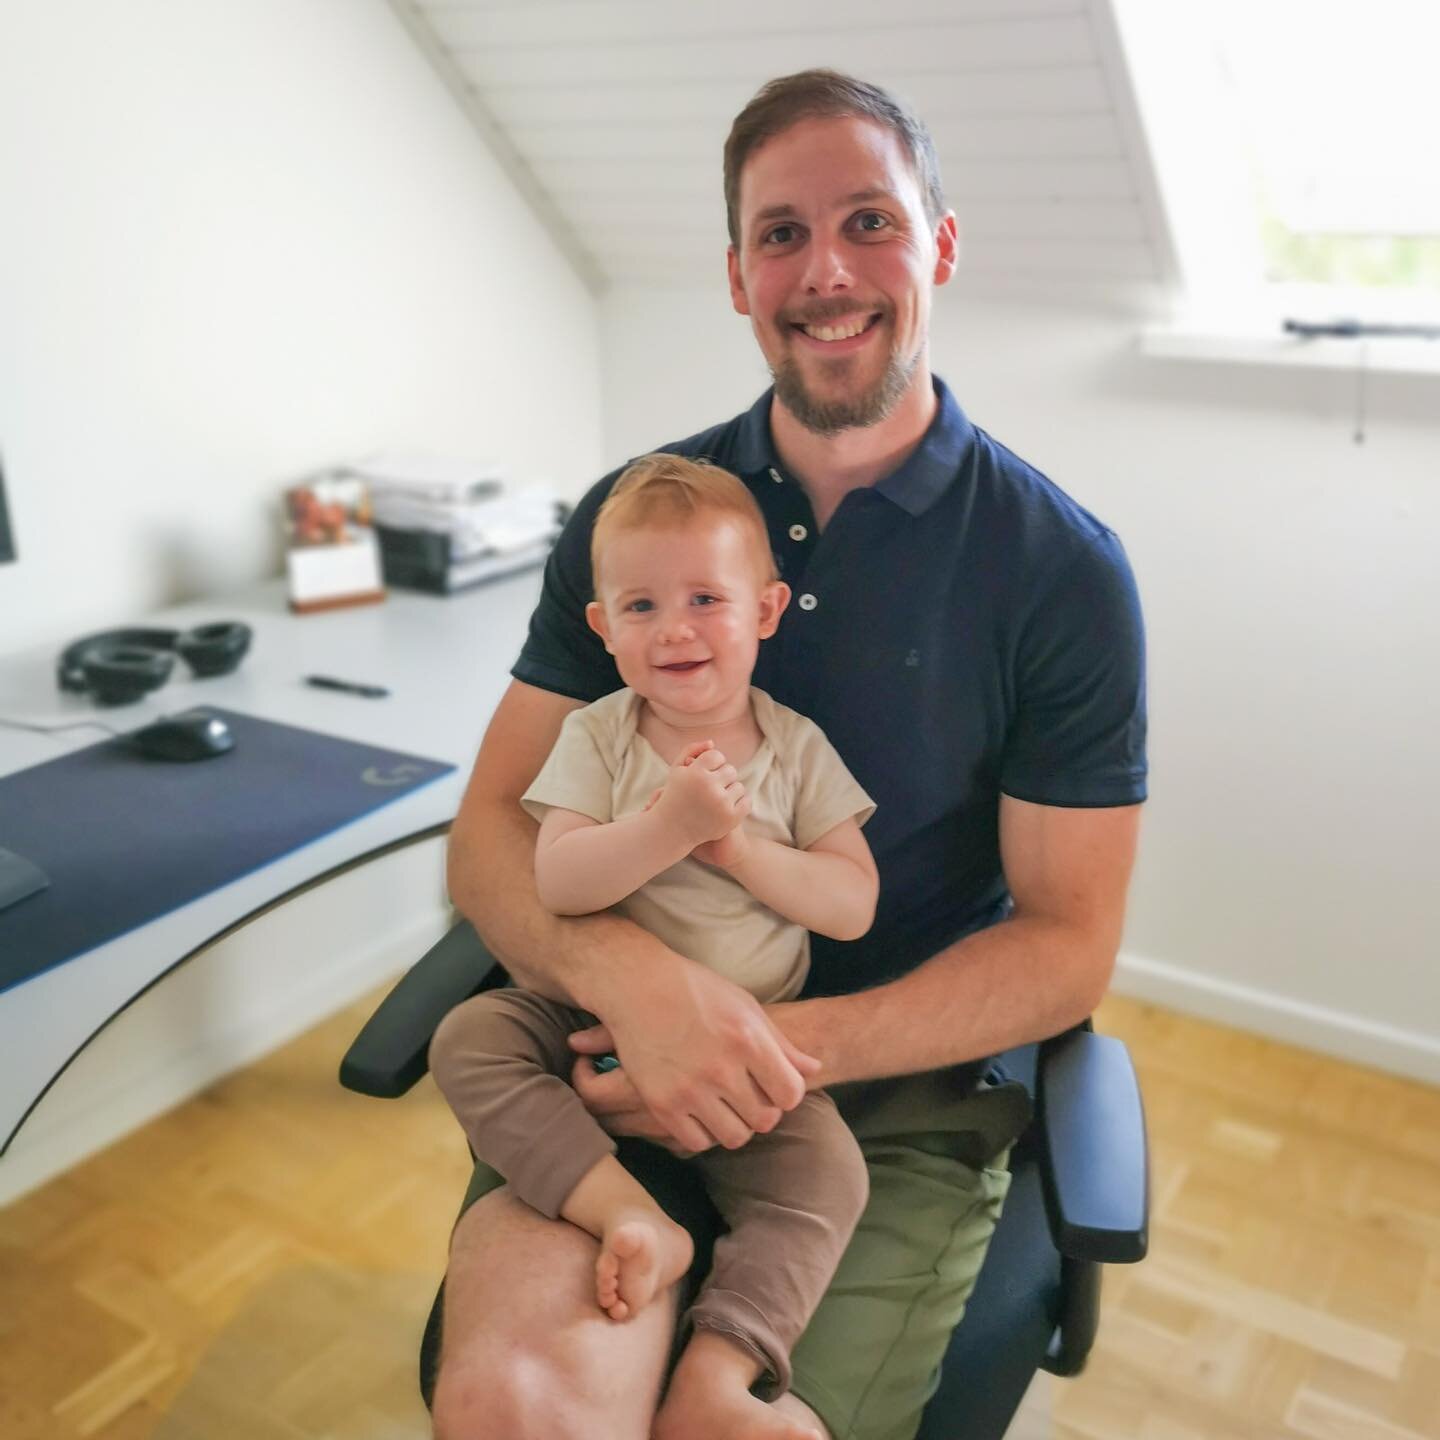 Daddy is back in business!

IDCC&rsquo;s Director, Mads, is now back in business after his parental leave. Reflecting on his time with little Hugo, he says:
 
&ldquo;First of all, I am grateful to be working for an organization that values gender equ